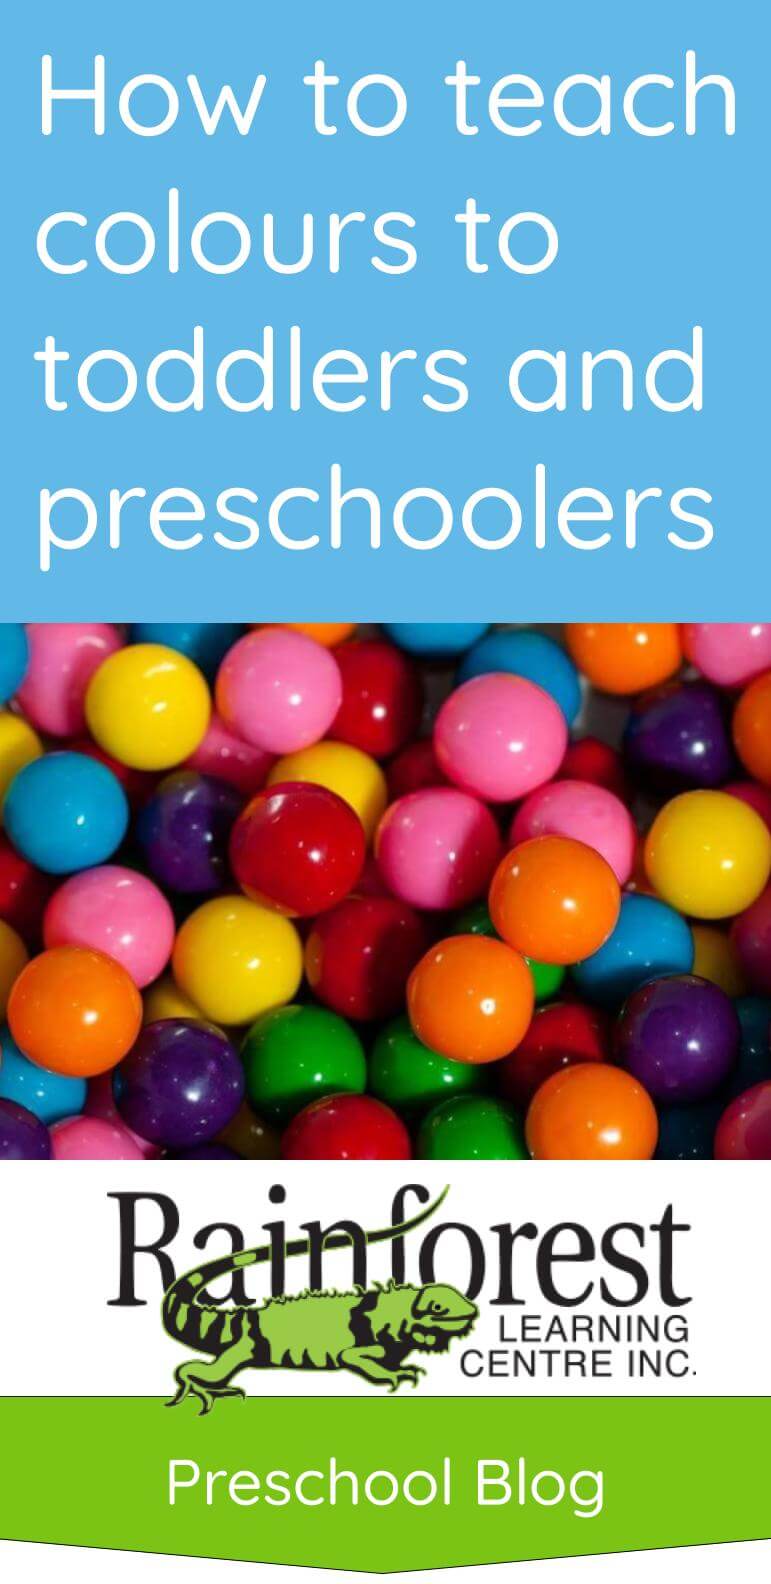 how to teach colors to preschoolers and toddlers - article pinterest image